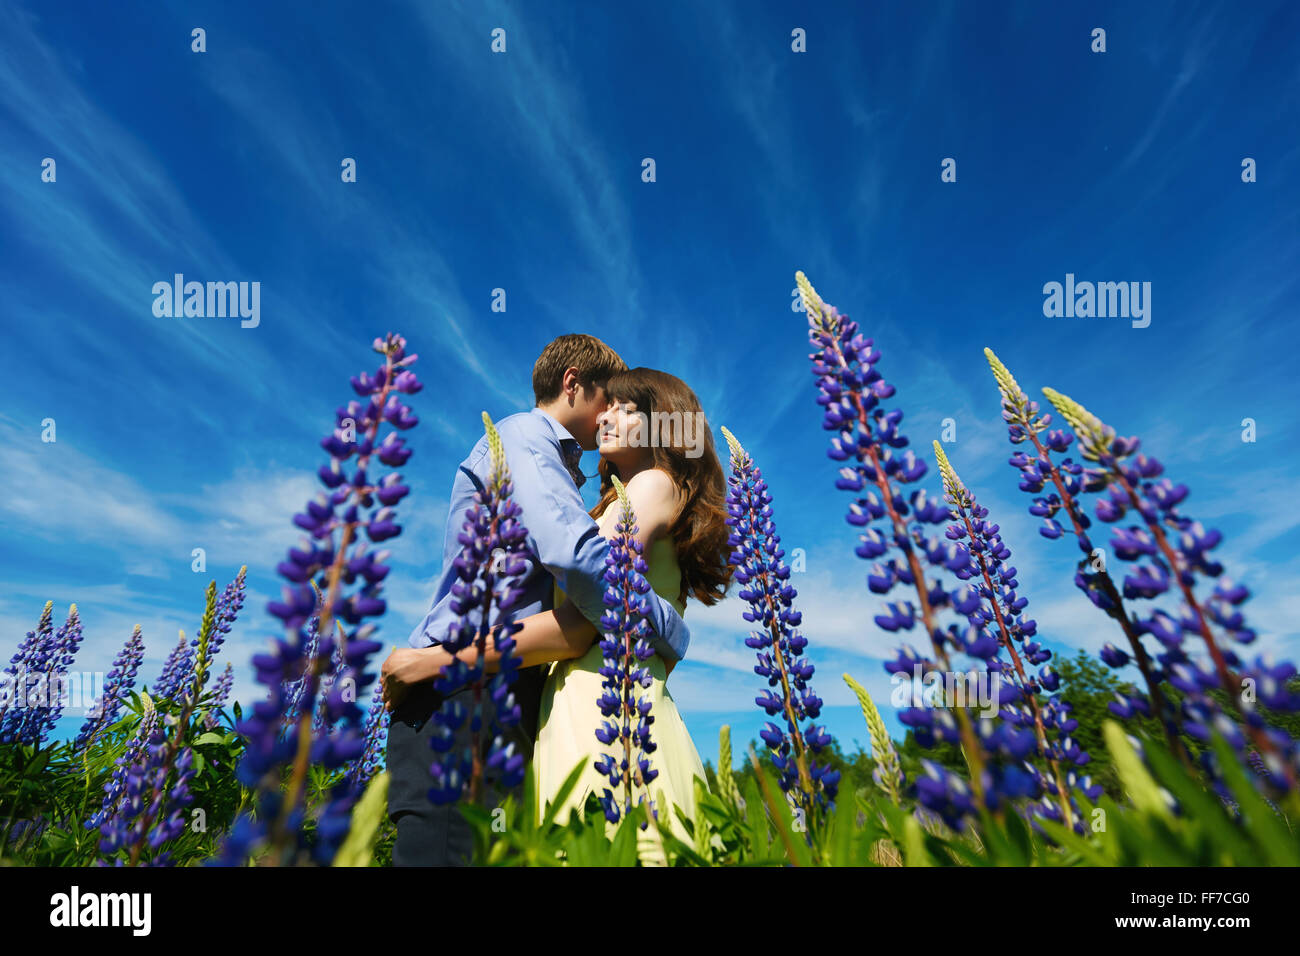 Couple in lupine flowers field embracing and smiling Stock Photo